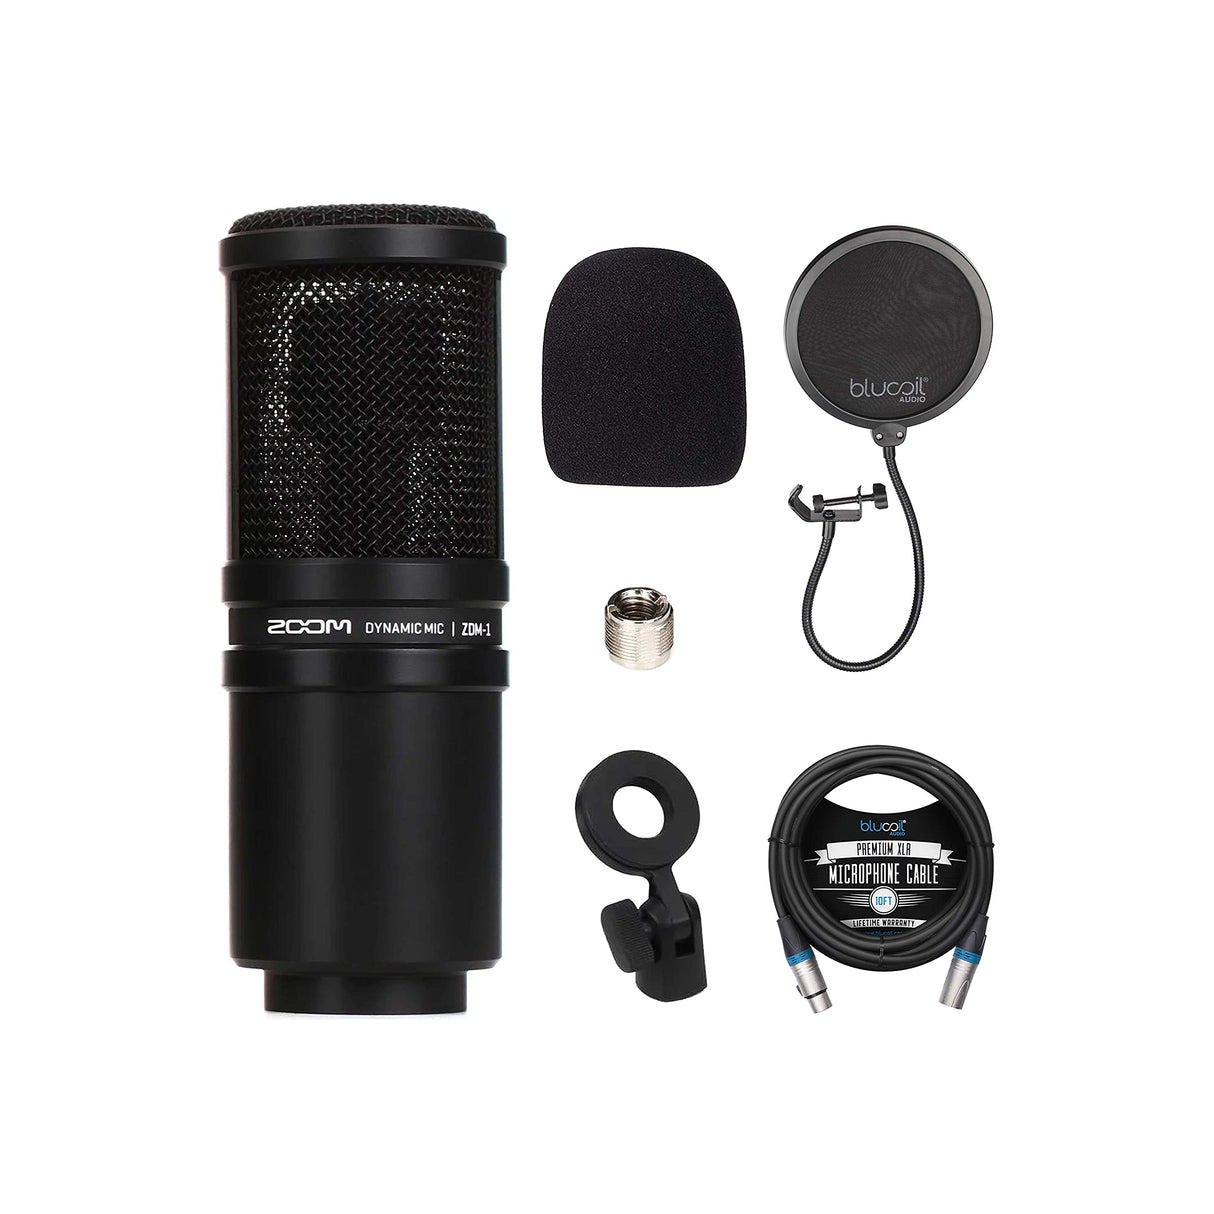 Zoom ZDM-1 Dynamic Microphone for Podcasts, Broadcasts, and Music Recording Bundle with Blucoil Pop Filter Windscreen, and 10-FT Balanced XLR Cable